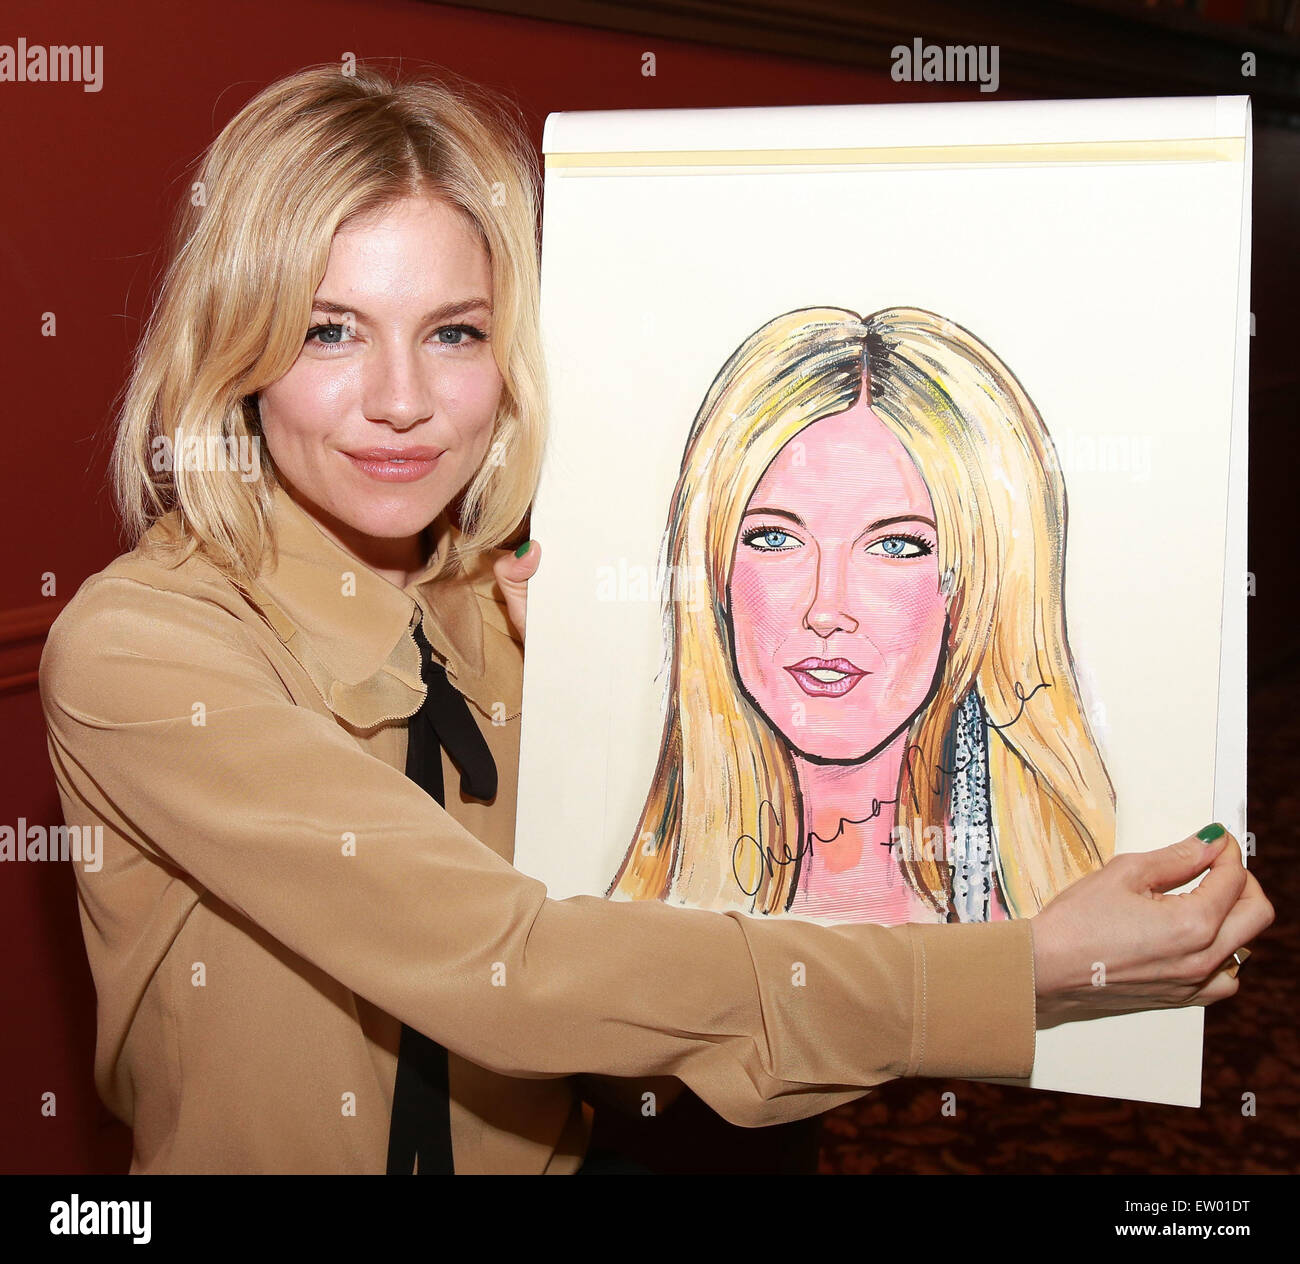 Sienna Miller's caricature portrait unveiling at Sardi's restaurant, a famous theater district eatery  Featuring: Sienna Miller Where: New York City, New York, United States When: 27 Mar 2015 C Stock Photo